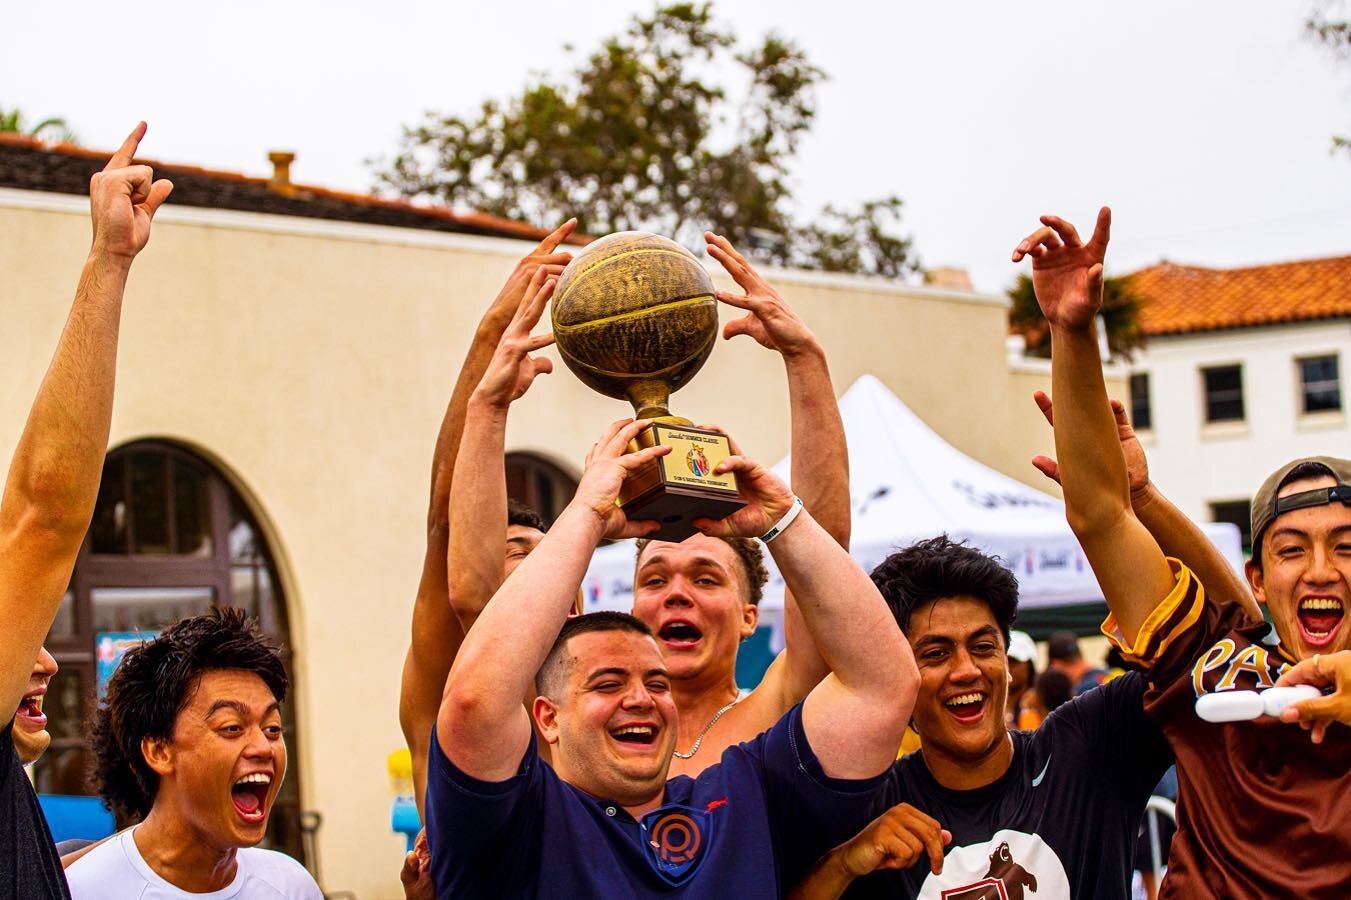 87 days until the 5th Annual 🏆 Will you and your team be ready?

Inquiries open at the end of this month. Stay tuned &amp; follow 🏀

#SneaksSummerClassic #SanDiego #BasketballTournament #CommunityEvent